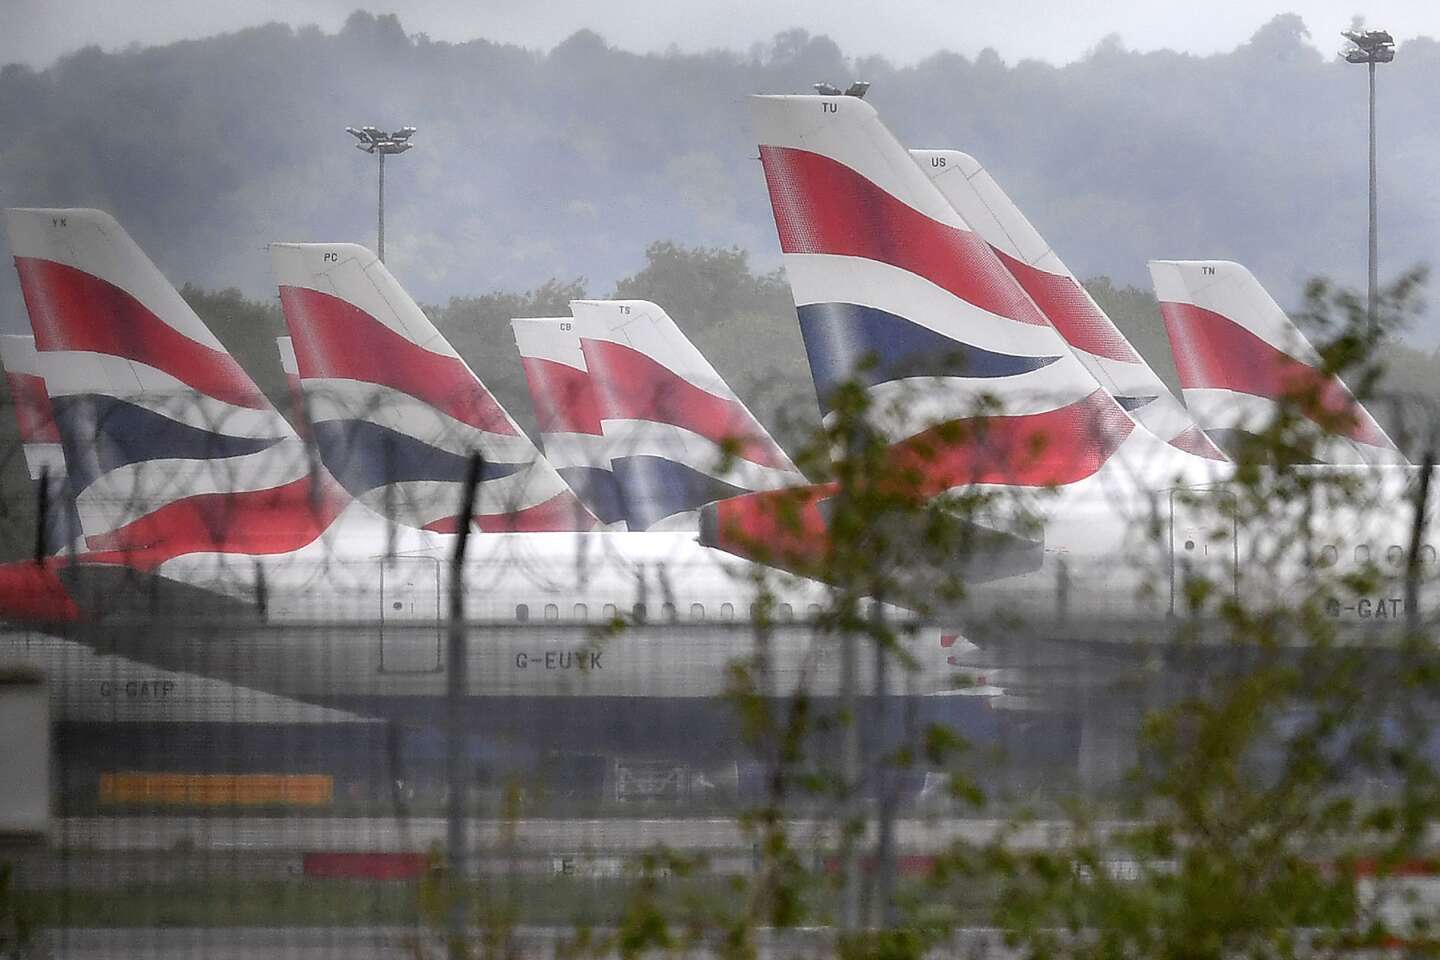 In the United Kingdom, more than 160 flights were canceled this week at London Gatwick Airport